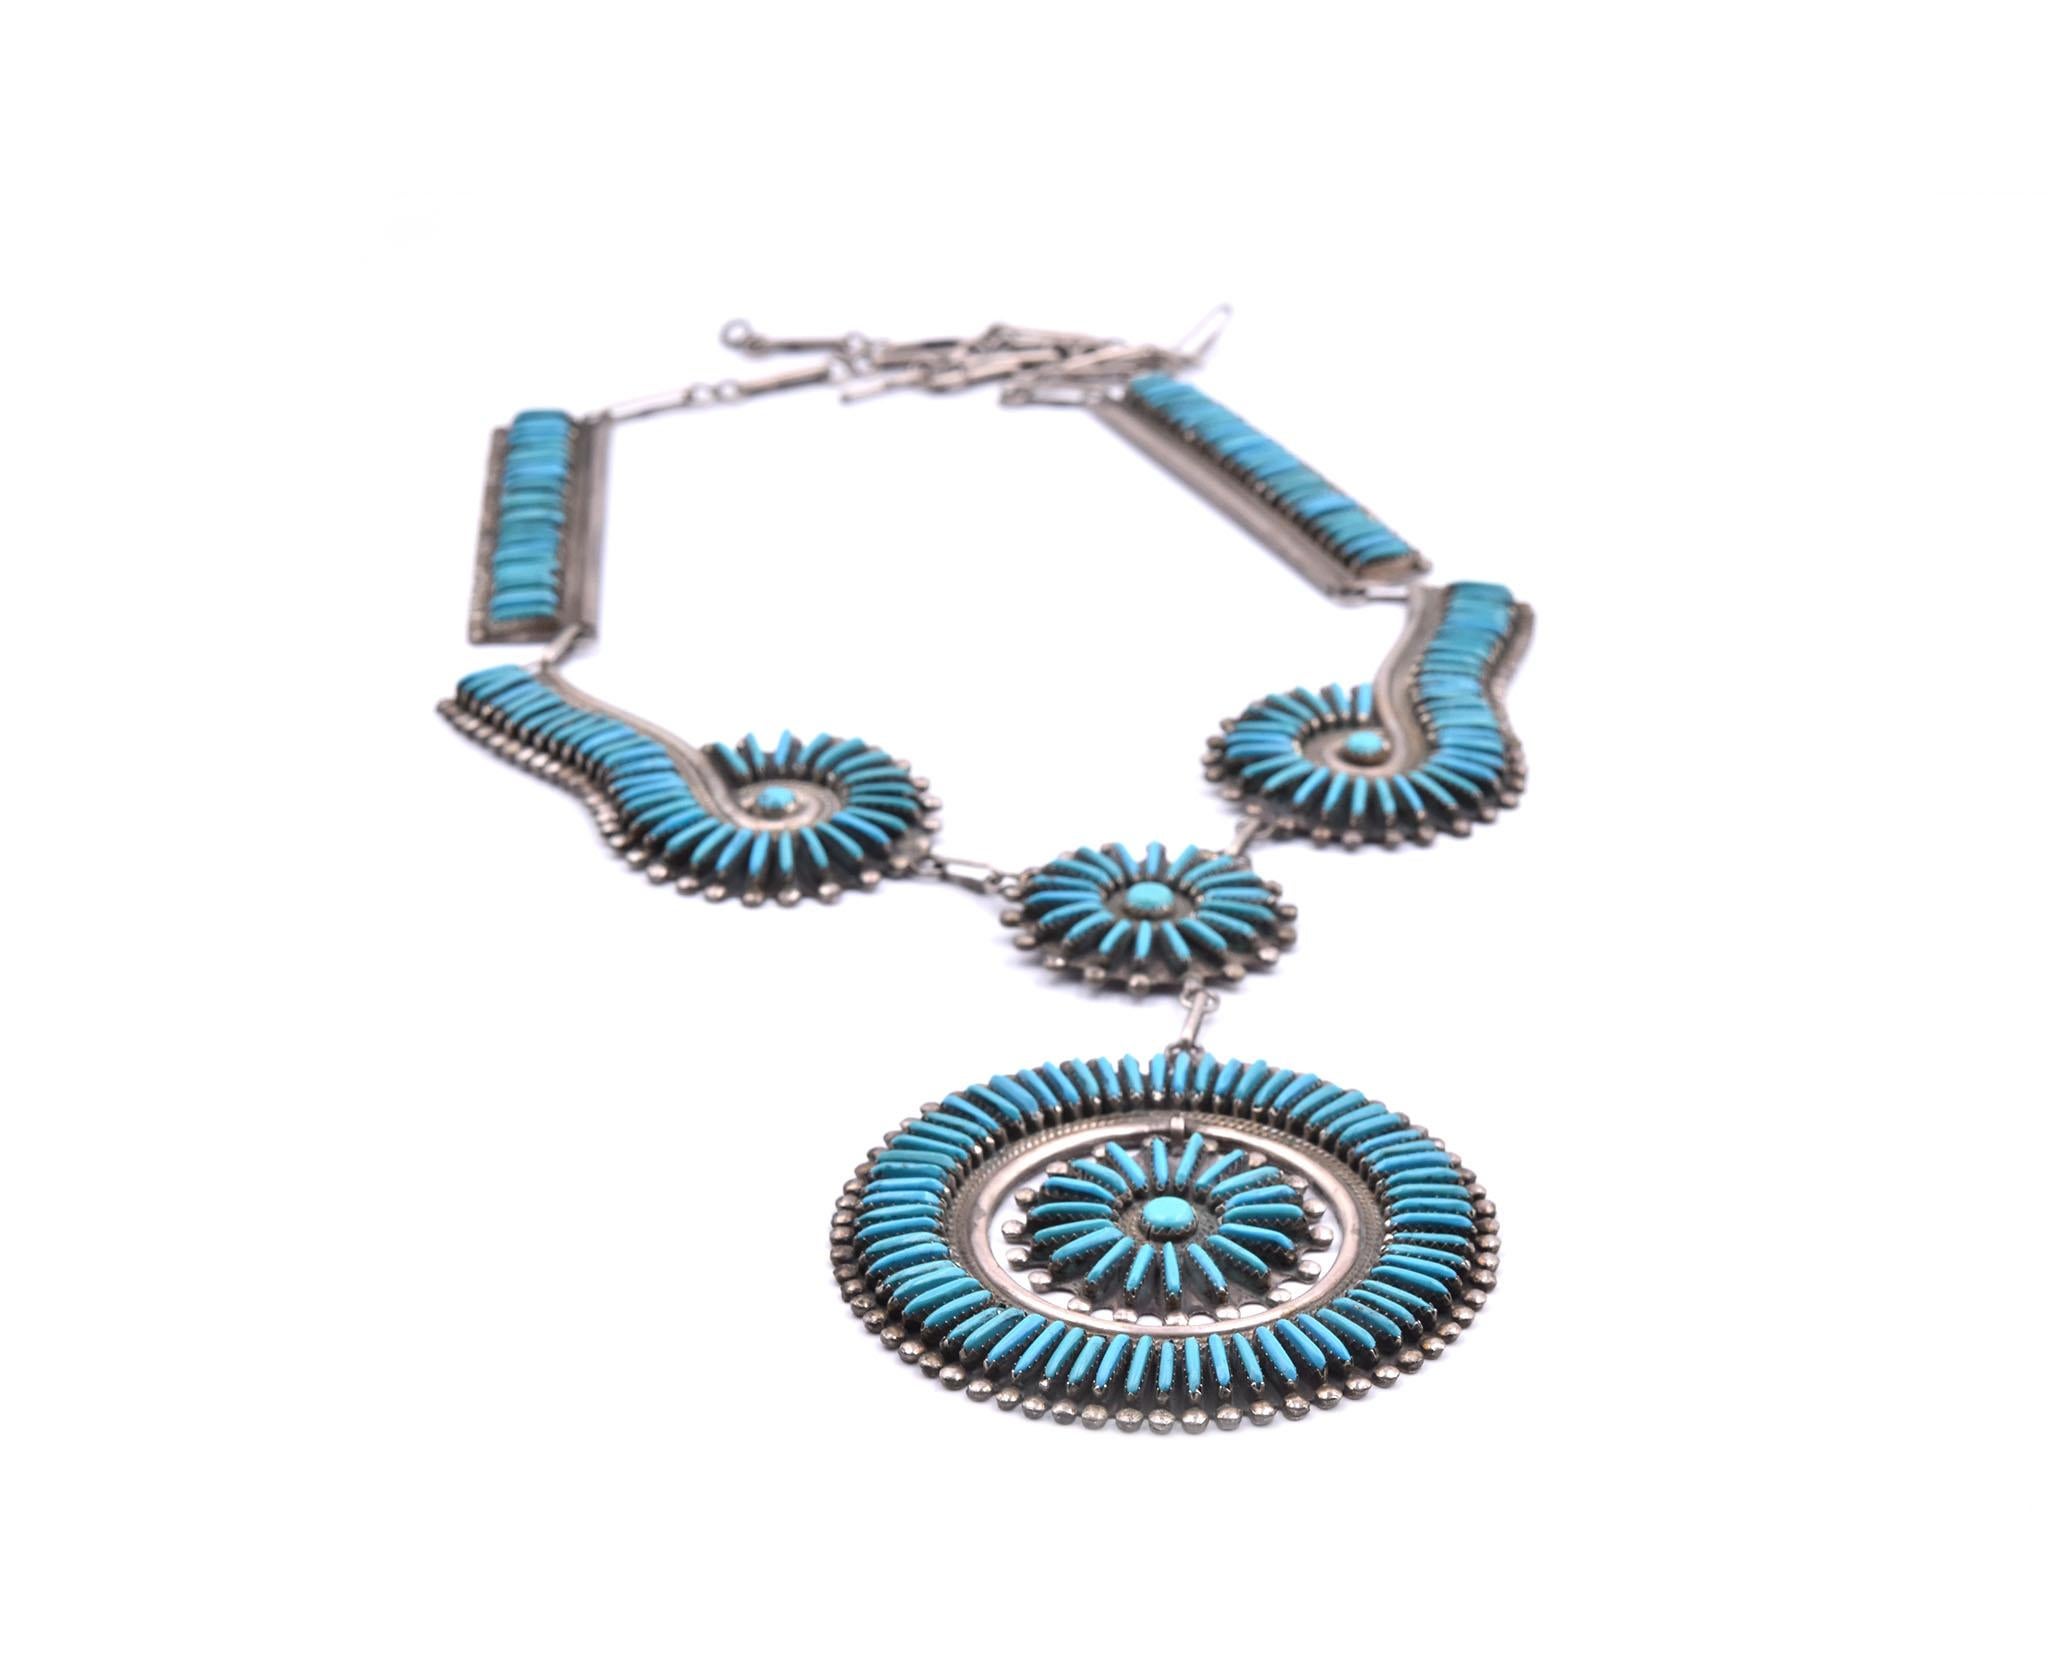 Designer: custom design
Material: sterling silver
Gemstones: turquoise
Dimensions: necklace is 18 ½ -inches long with medallion measuring 76.12mm in diameter 
Weight: 134.57 grams
